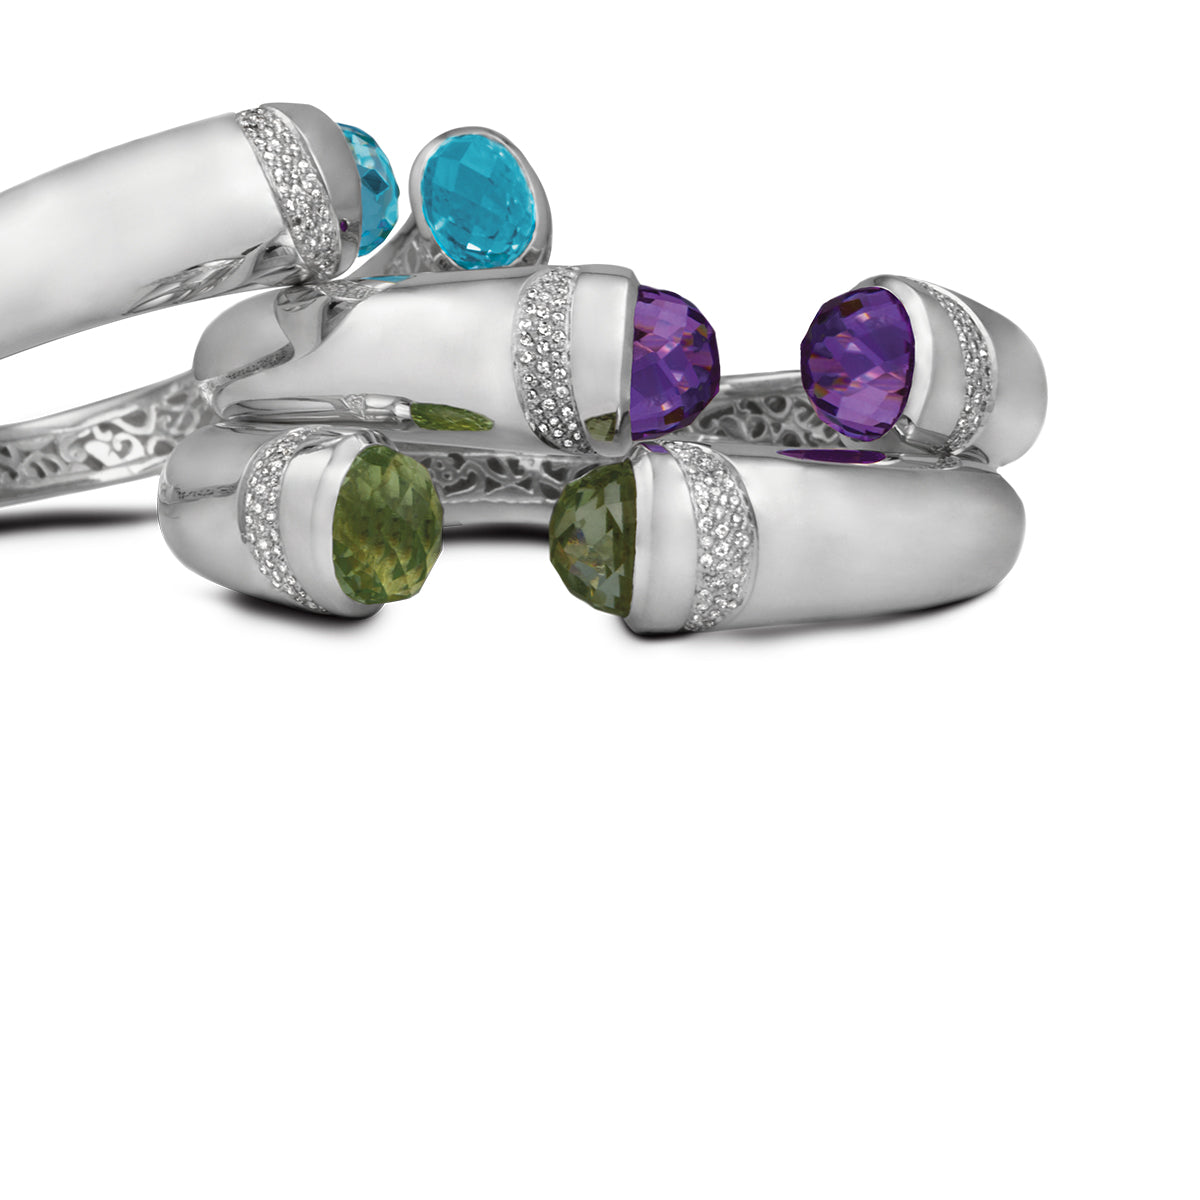 Sterling silver bangle with blue topaz and amethyst